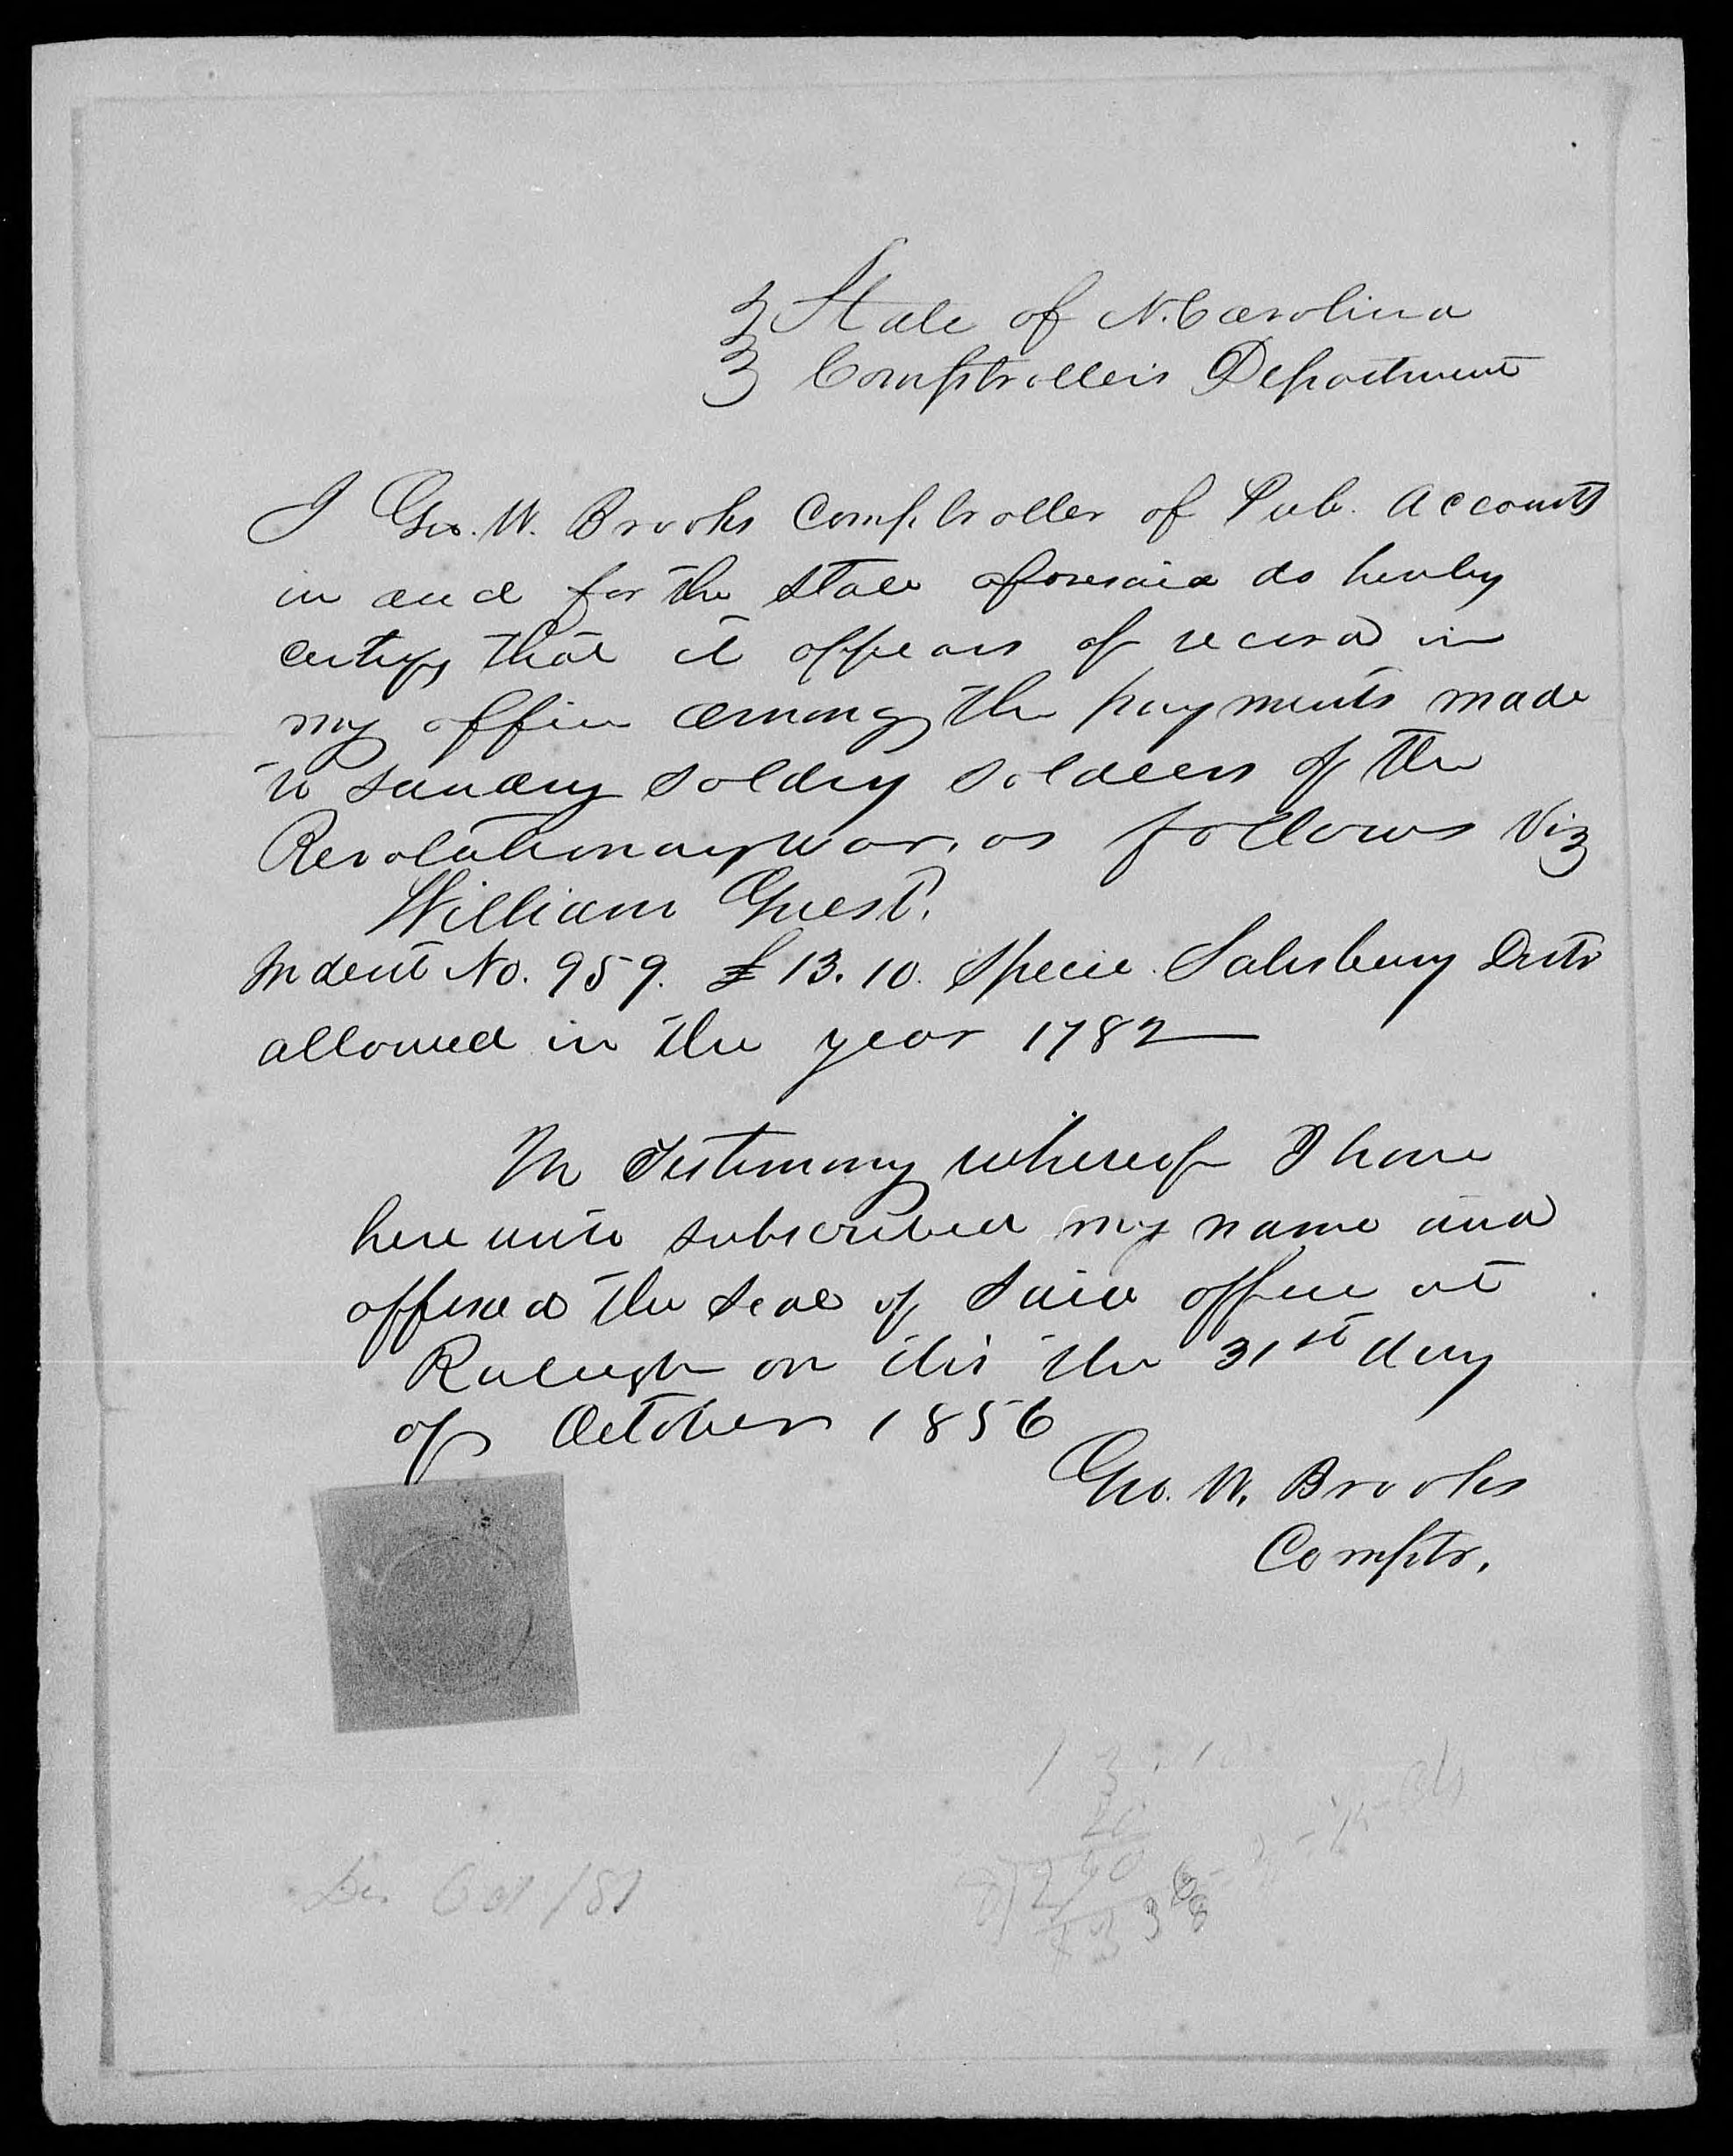 Proof of Service for William Guest, 31 October 1856